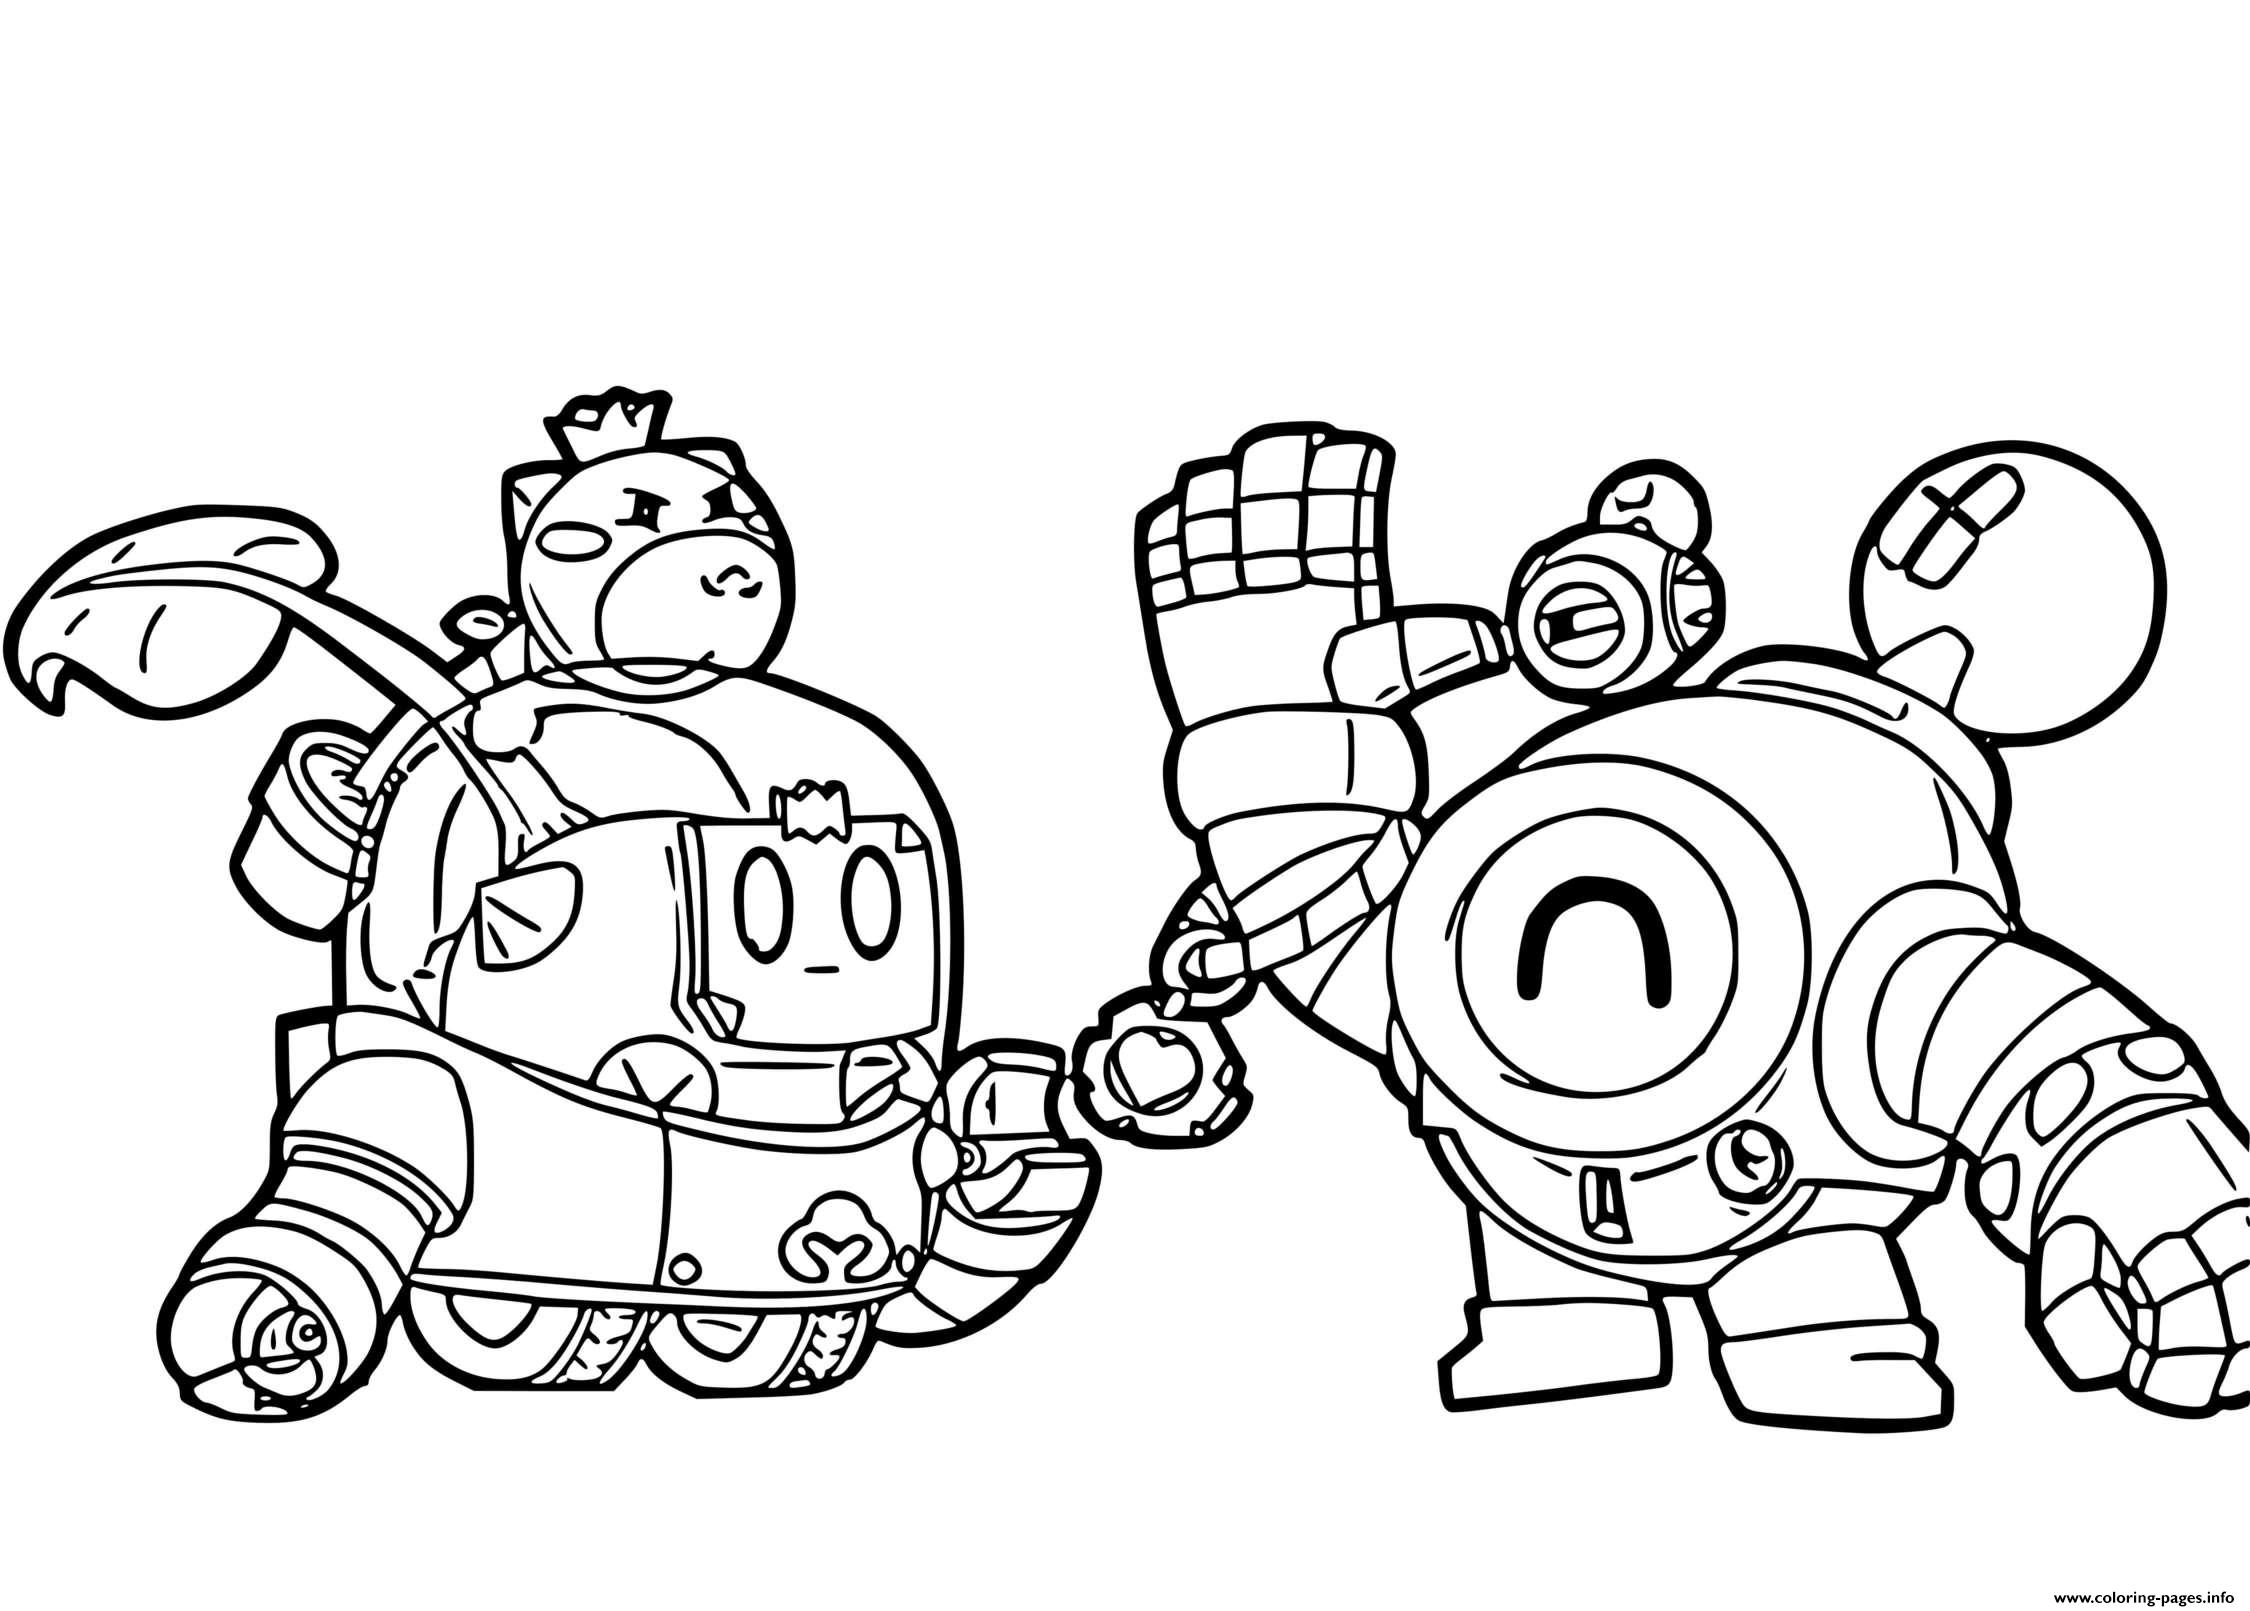 Sprout Et Nani Brawl Stars Coloring Pages Printable